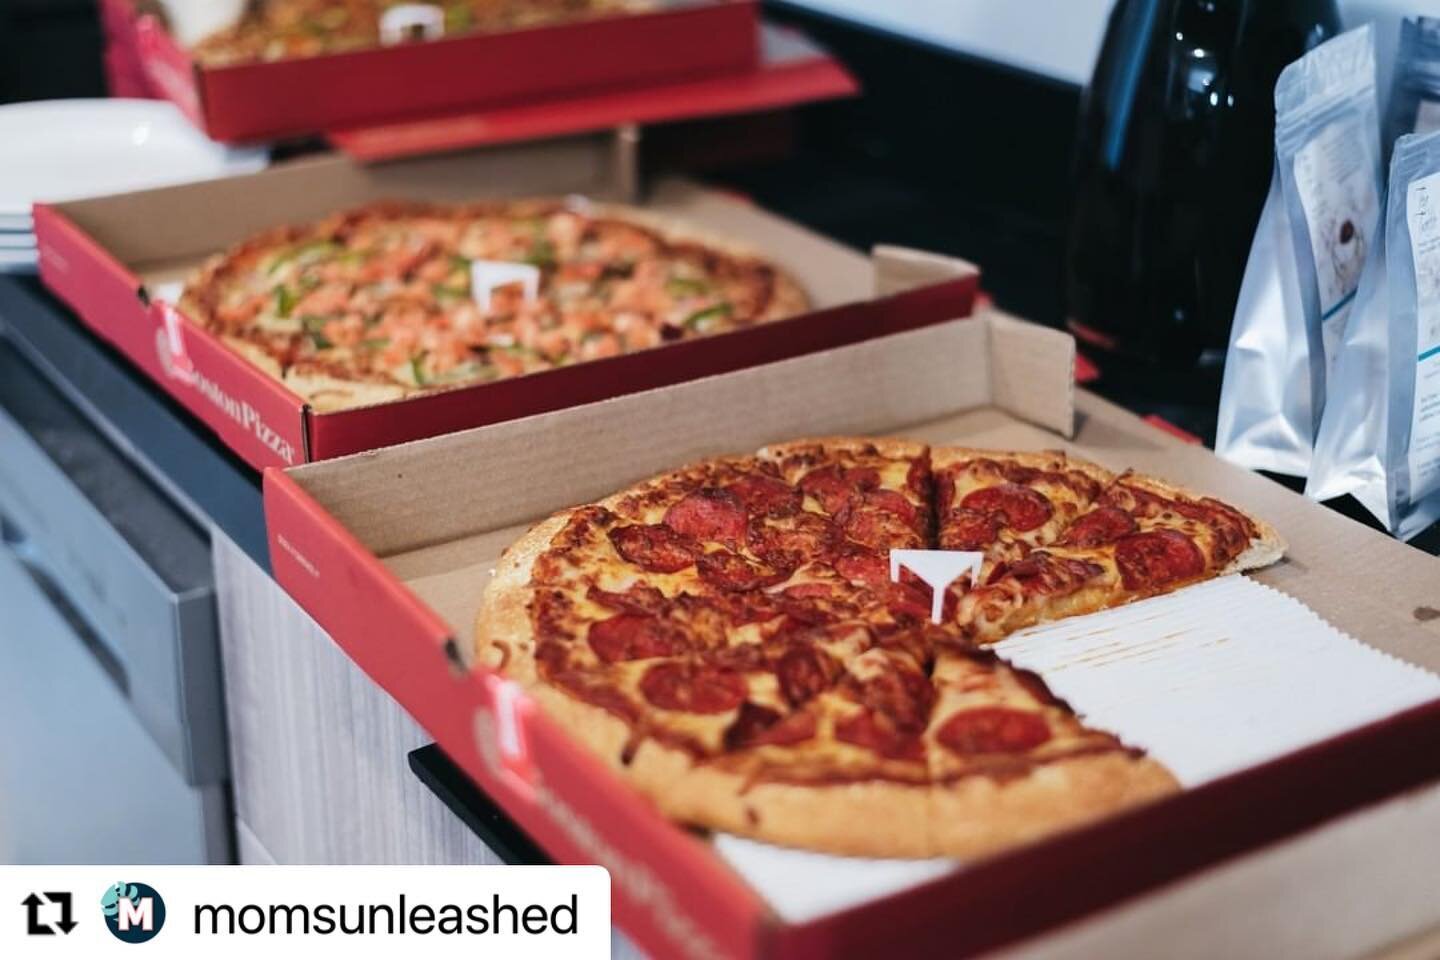 #Repost @momsunleashed
・・・
Friendly Reminder: Ordering a shit ton of takeout DOES NOT make you a bad parent💁&zwj;♀️

Nothing like a good slice of @bostonpizzaburlingtonnorth 'za to make the end of the week a little bit easier! 

📸 @jessicawaughphot